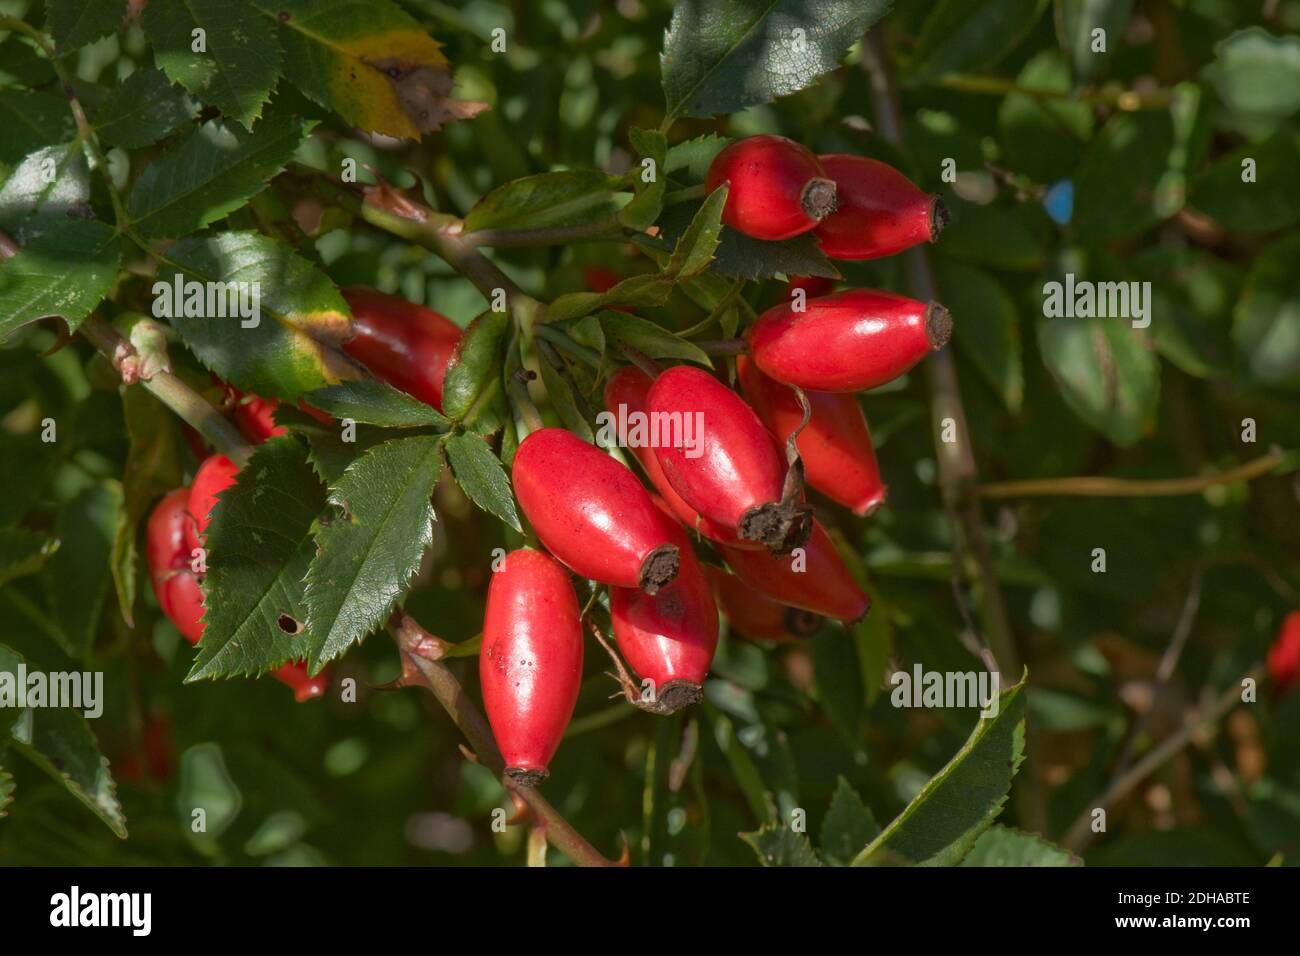 Ripe red fruit, hips, of a wild dog rose (Rosa canina) high in vitamin C, B & E and antioxidants, they are used medicinally and for cooking. Stock Photo